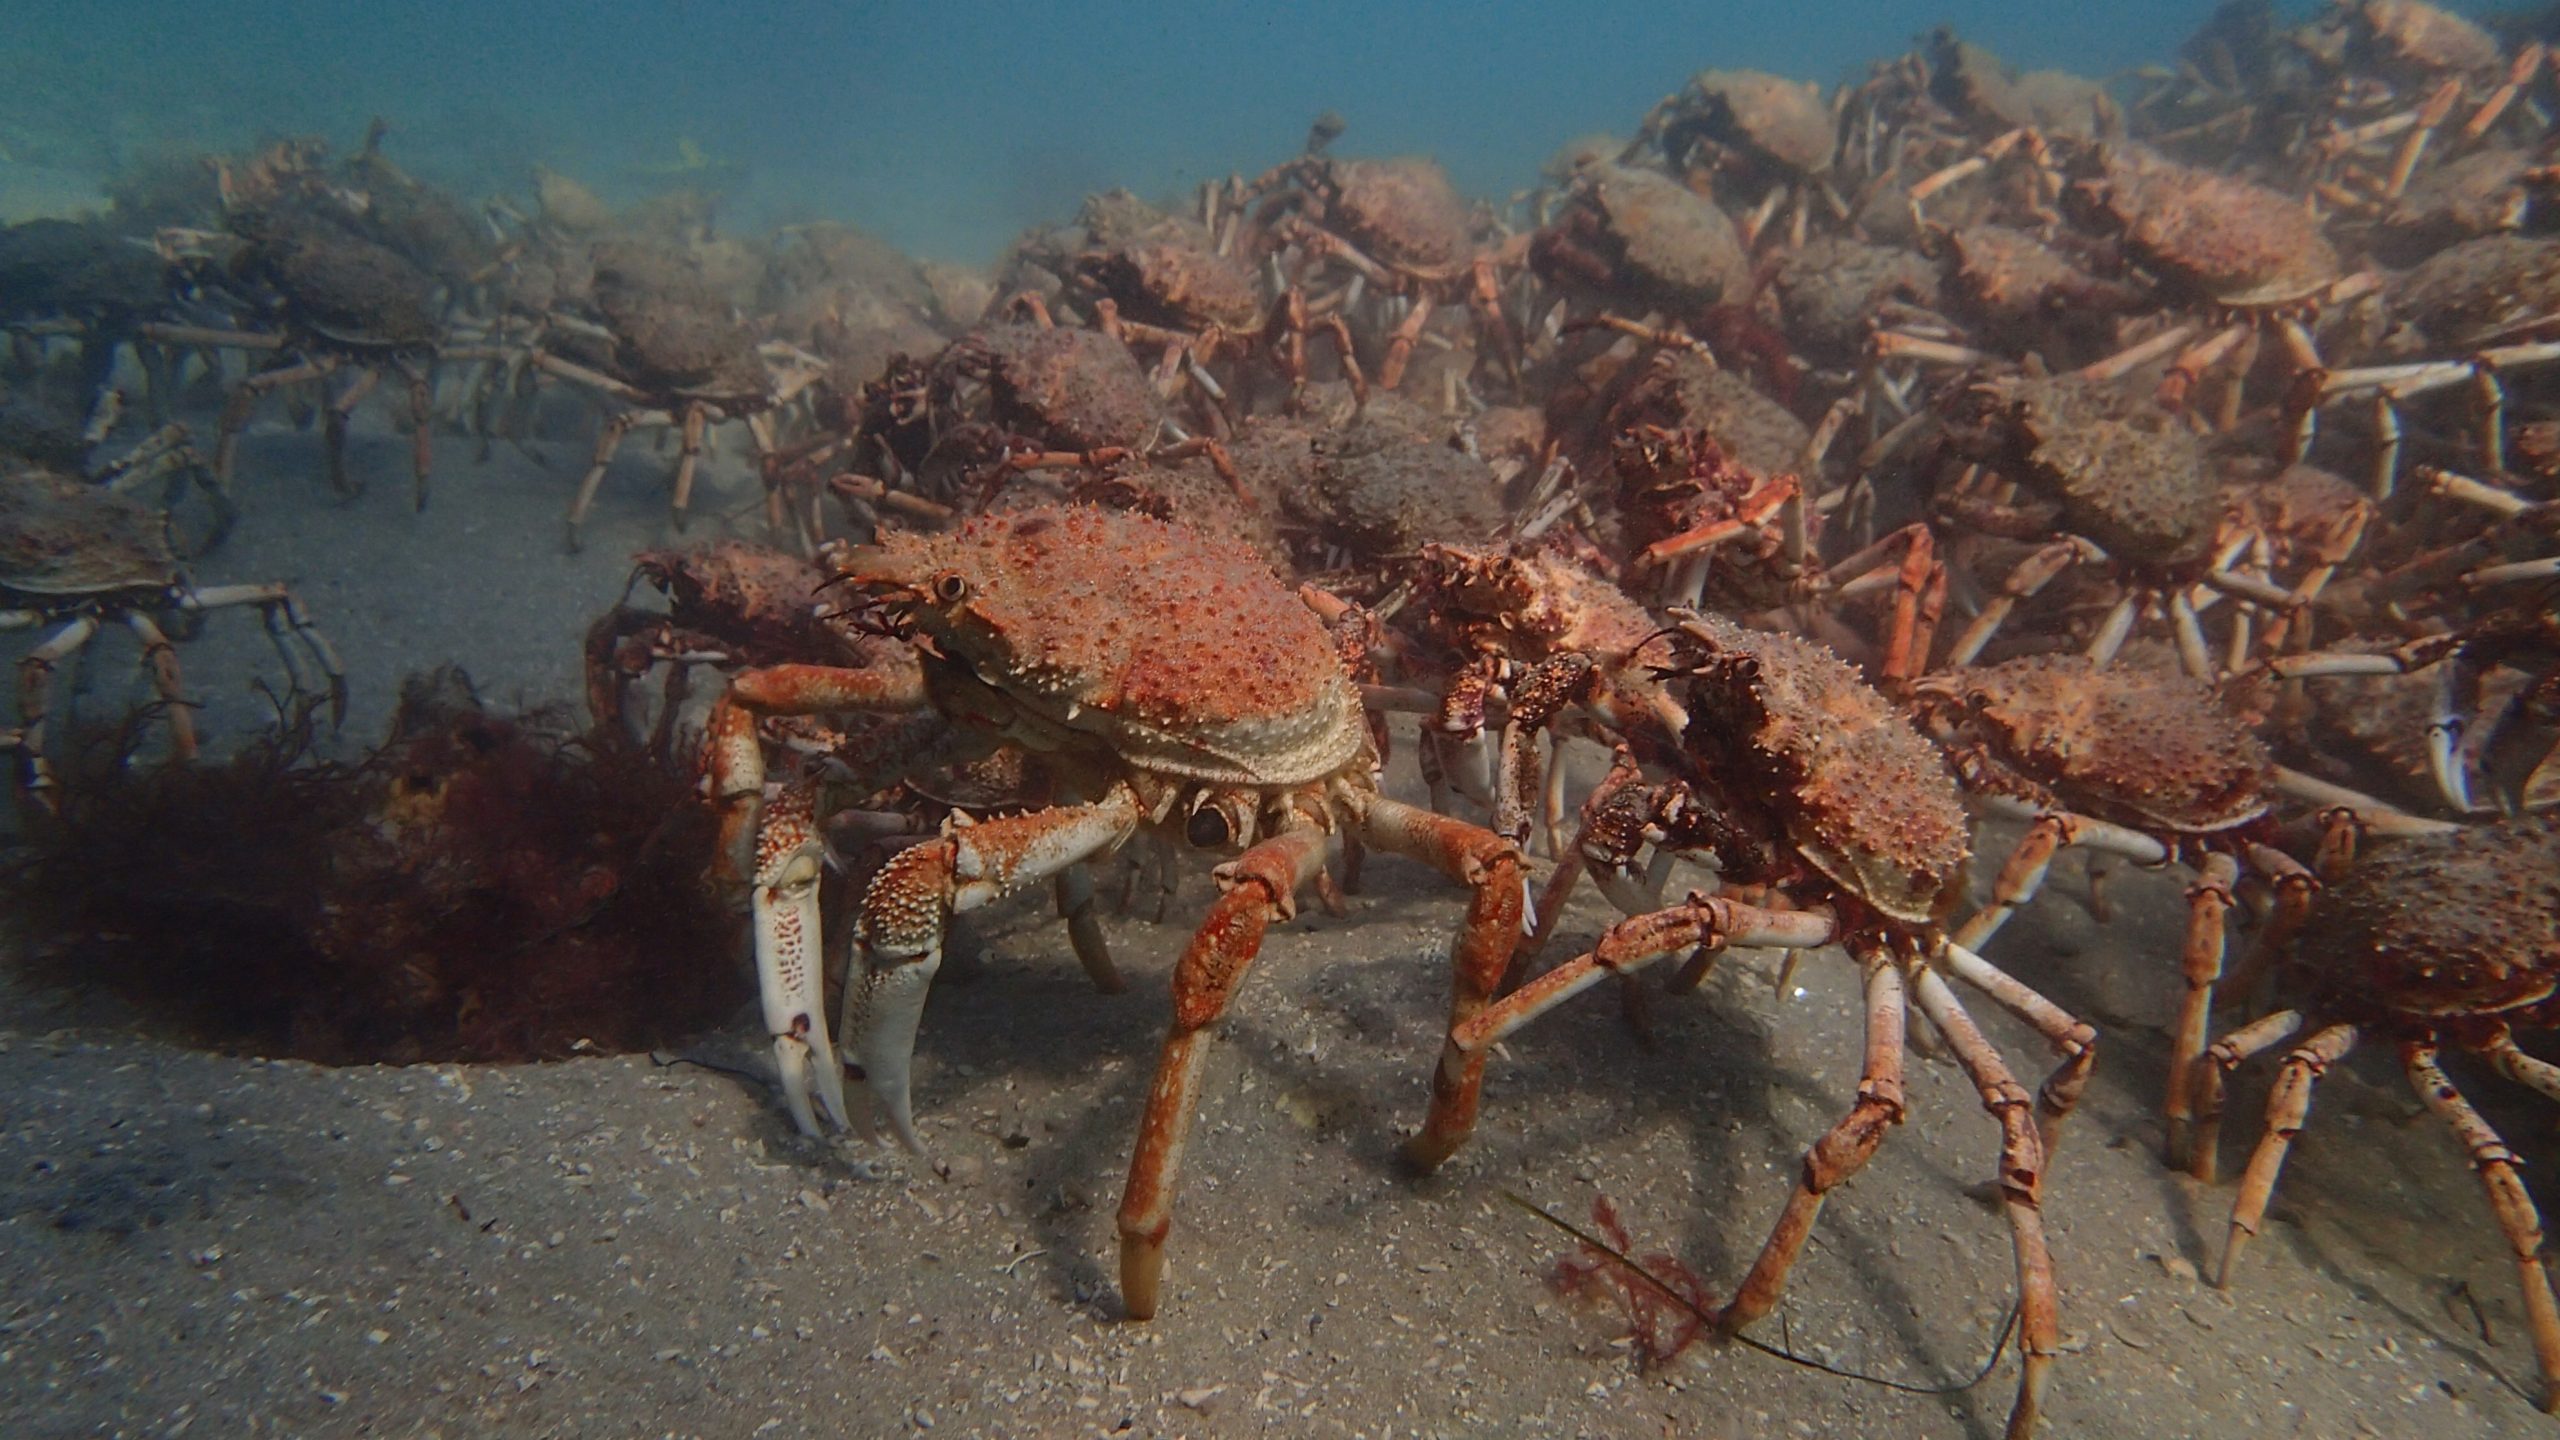 Helping solve spider crab mysteries, one citizen scientist at a time -  Remember The Wild